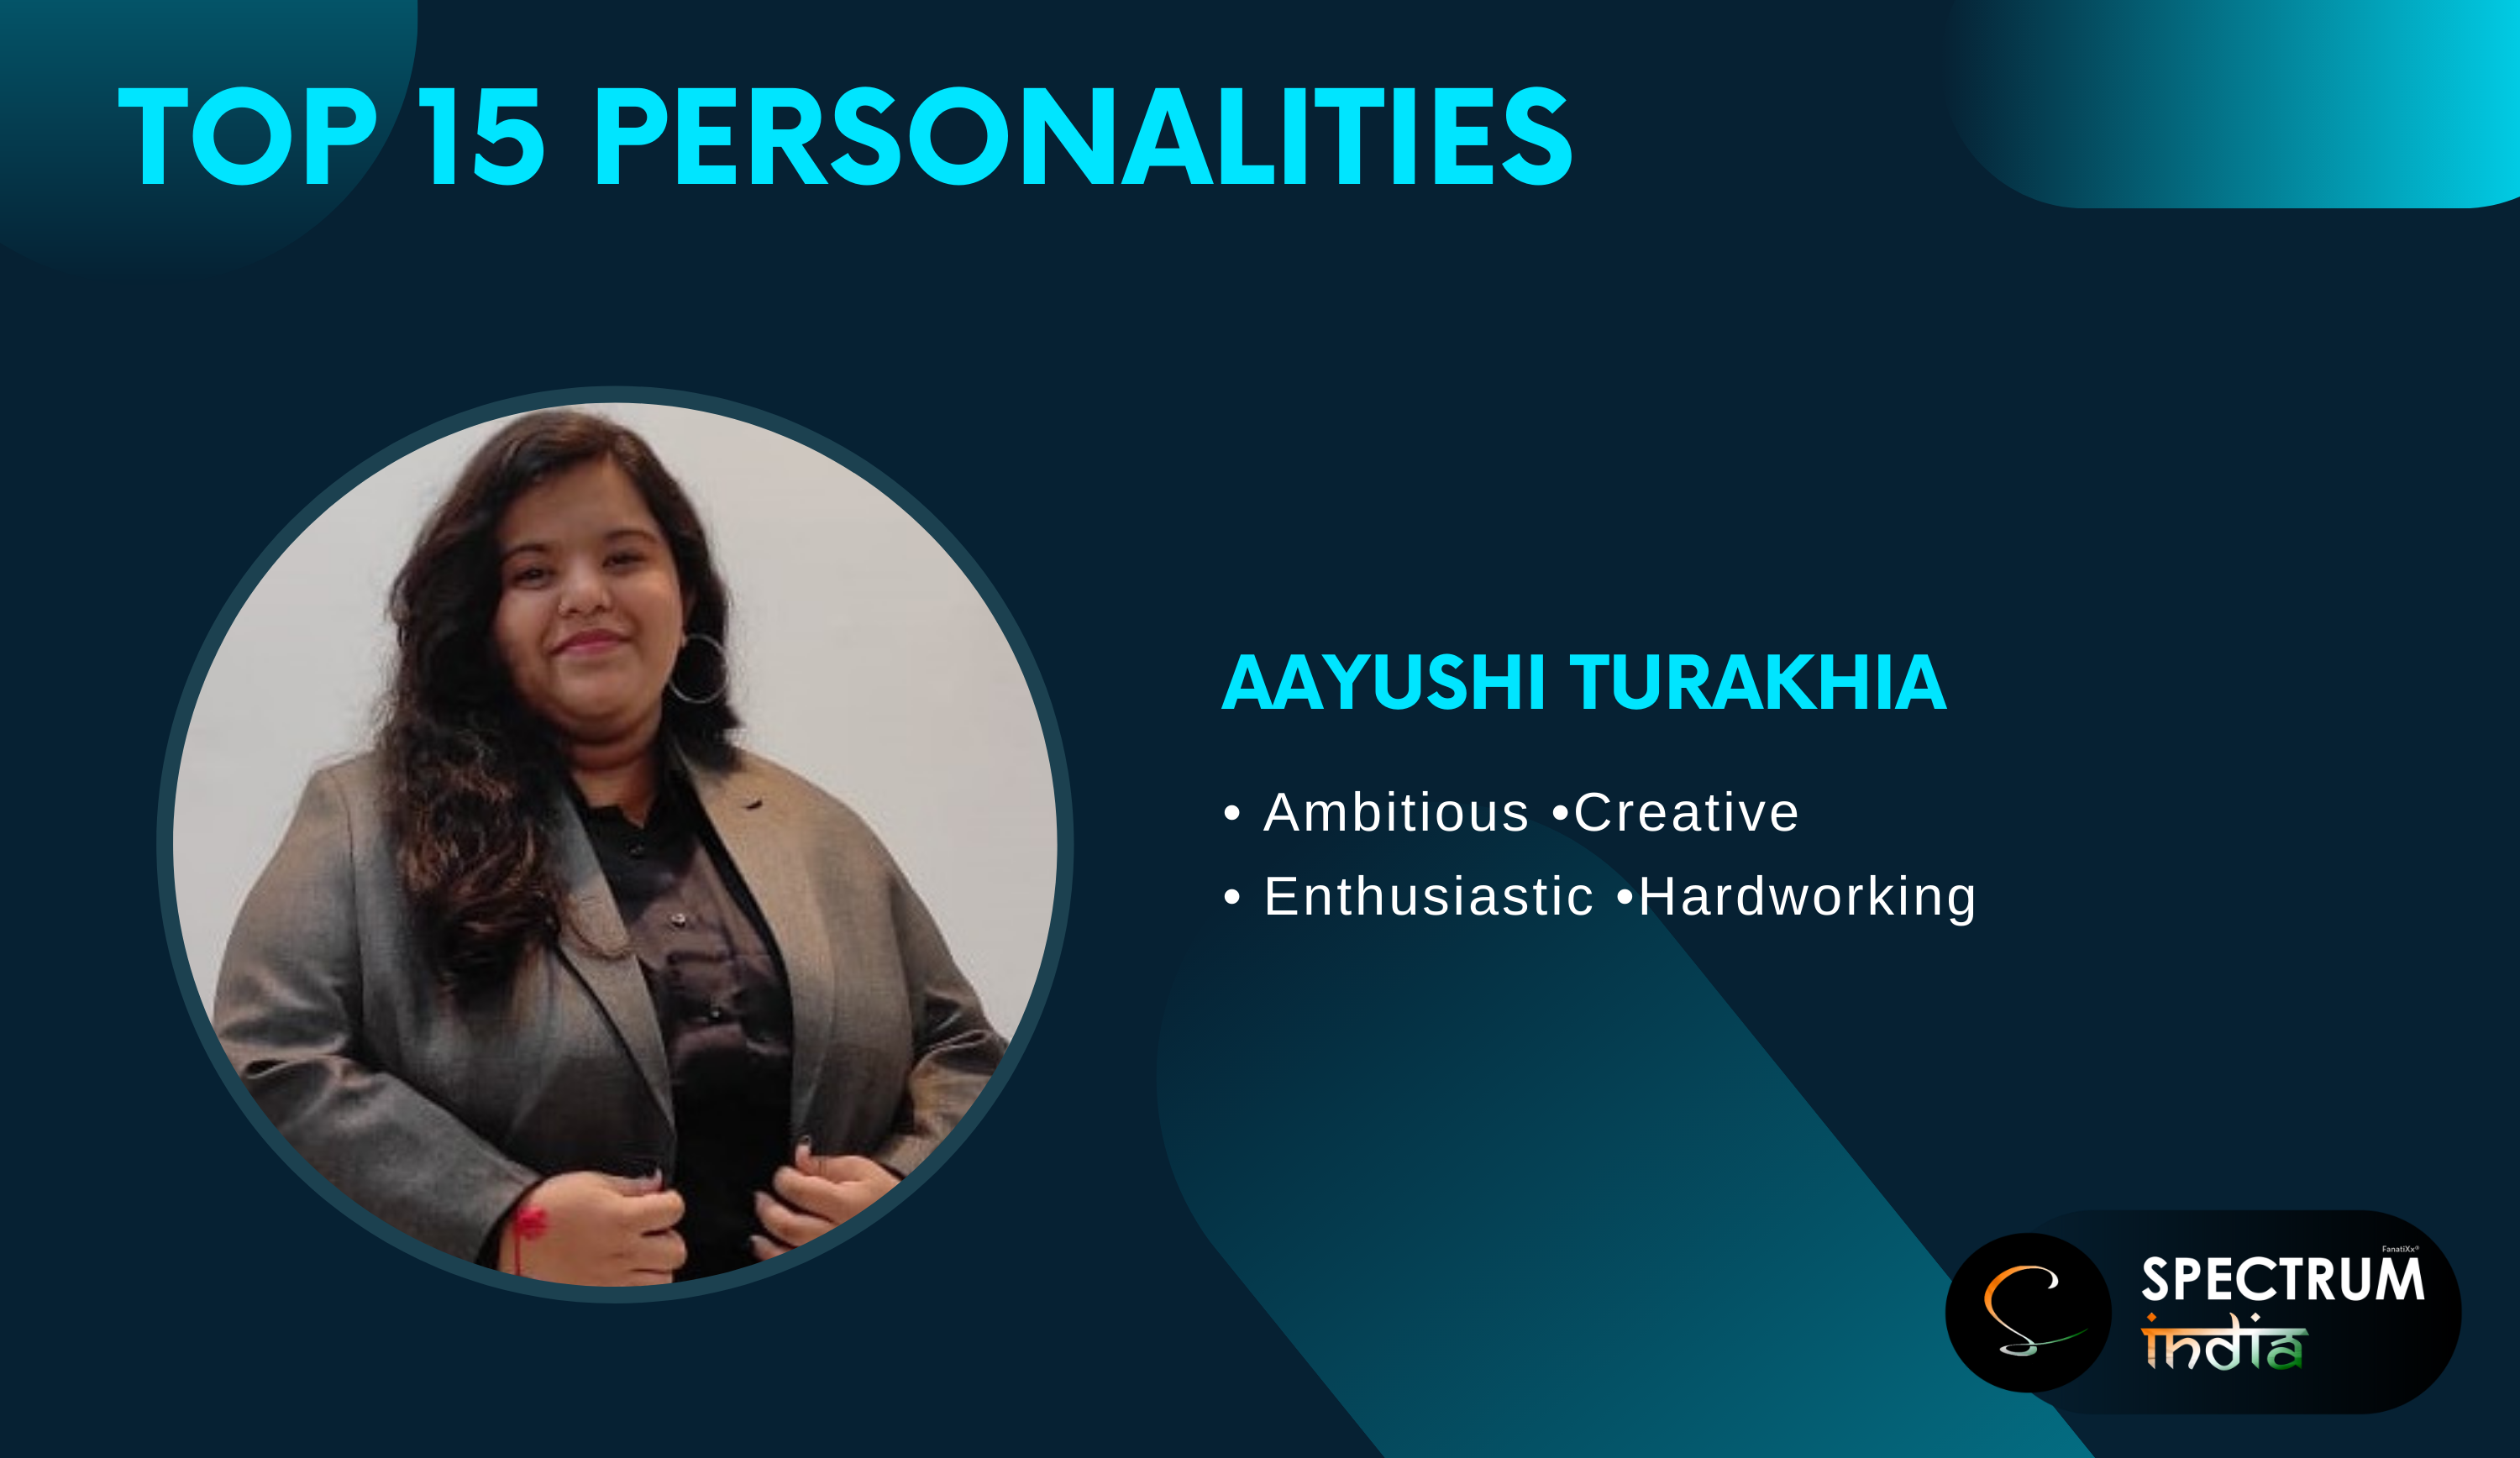 Aayushi Turakhia Featured as 'Top 15 Personalities' by Spectrum India; Shares Her Journey